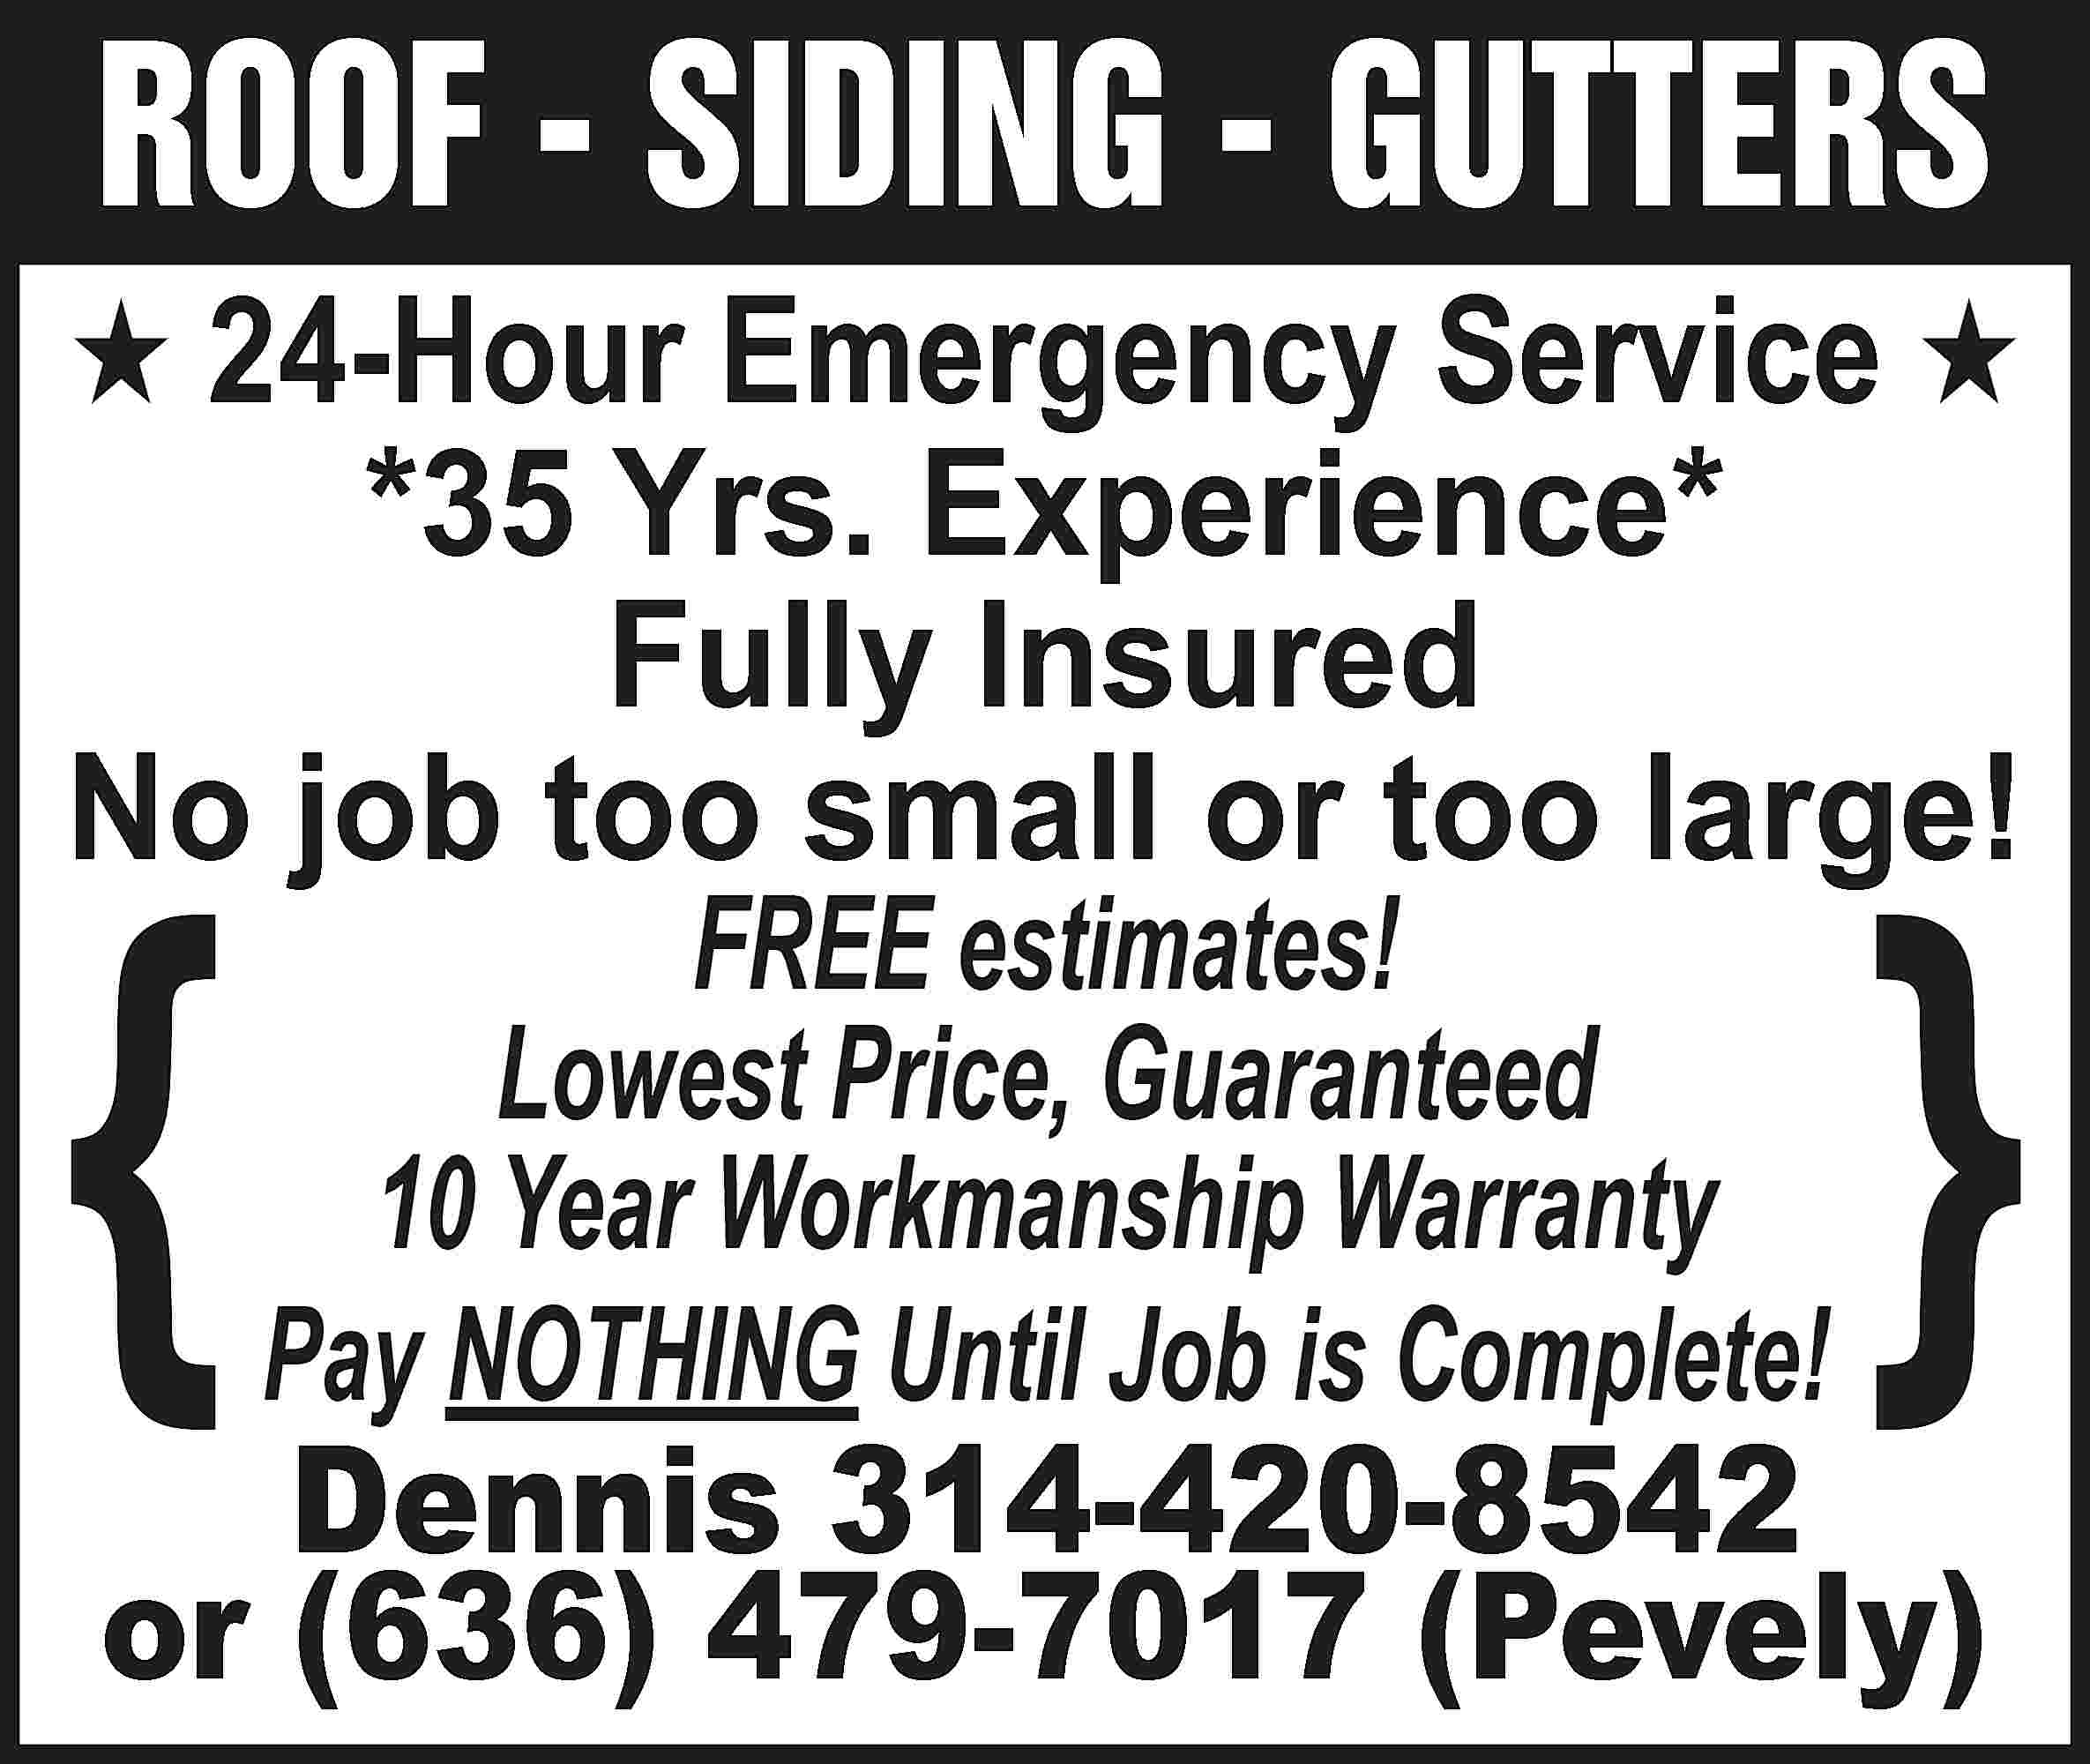 ROOF - SIDING - GUTTERS  ROOF - SIDING - GUTTERS H 24-Hour Emergency Service H *35 Yrs. Experience* Fully Insured No job too small or too large! { FREE estimates! Lowest Price, Guaranteed 10 Year Workmanship Warranty Pay NOTHING Until Job is Complete! { Dennis 314-420-8542 or (636) 479-7017 (Pevely)